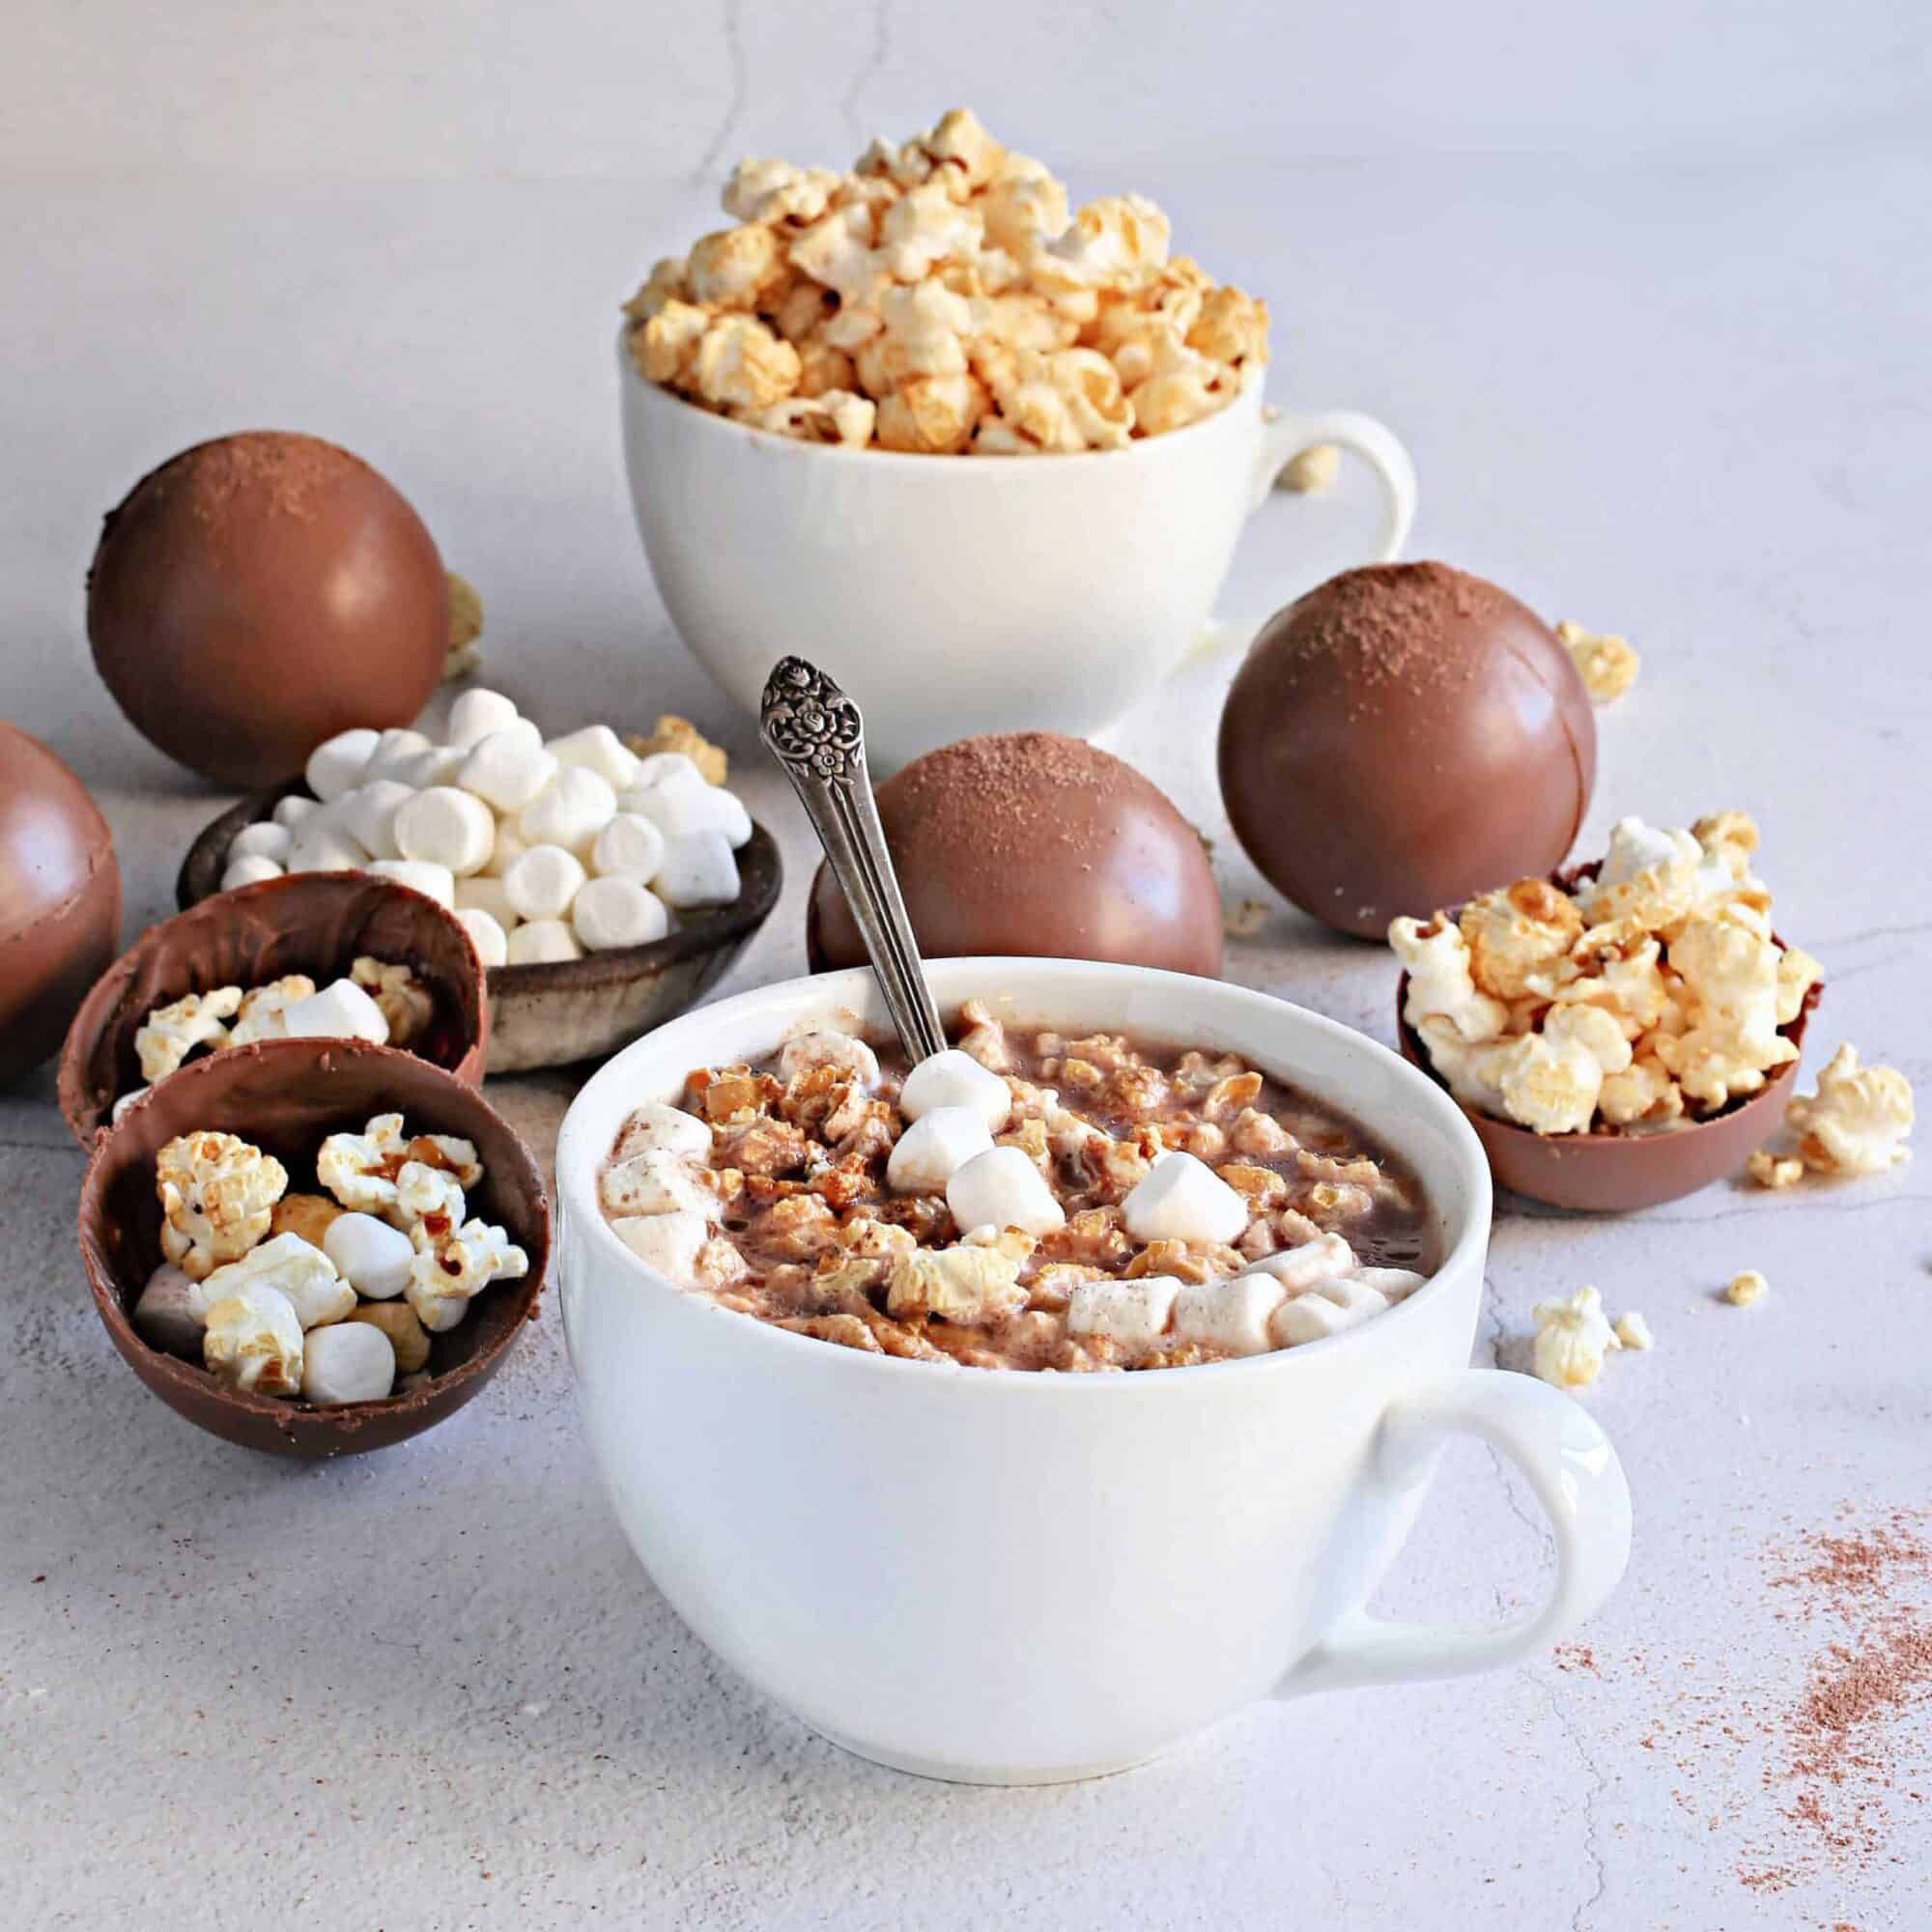 https://try.dellcovespices.com/wp-content/uploads/2022/03/Hot-Cocoa-Popcorn-Bombs-2000x2000.jpg